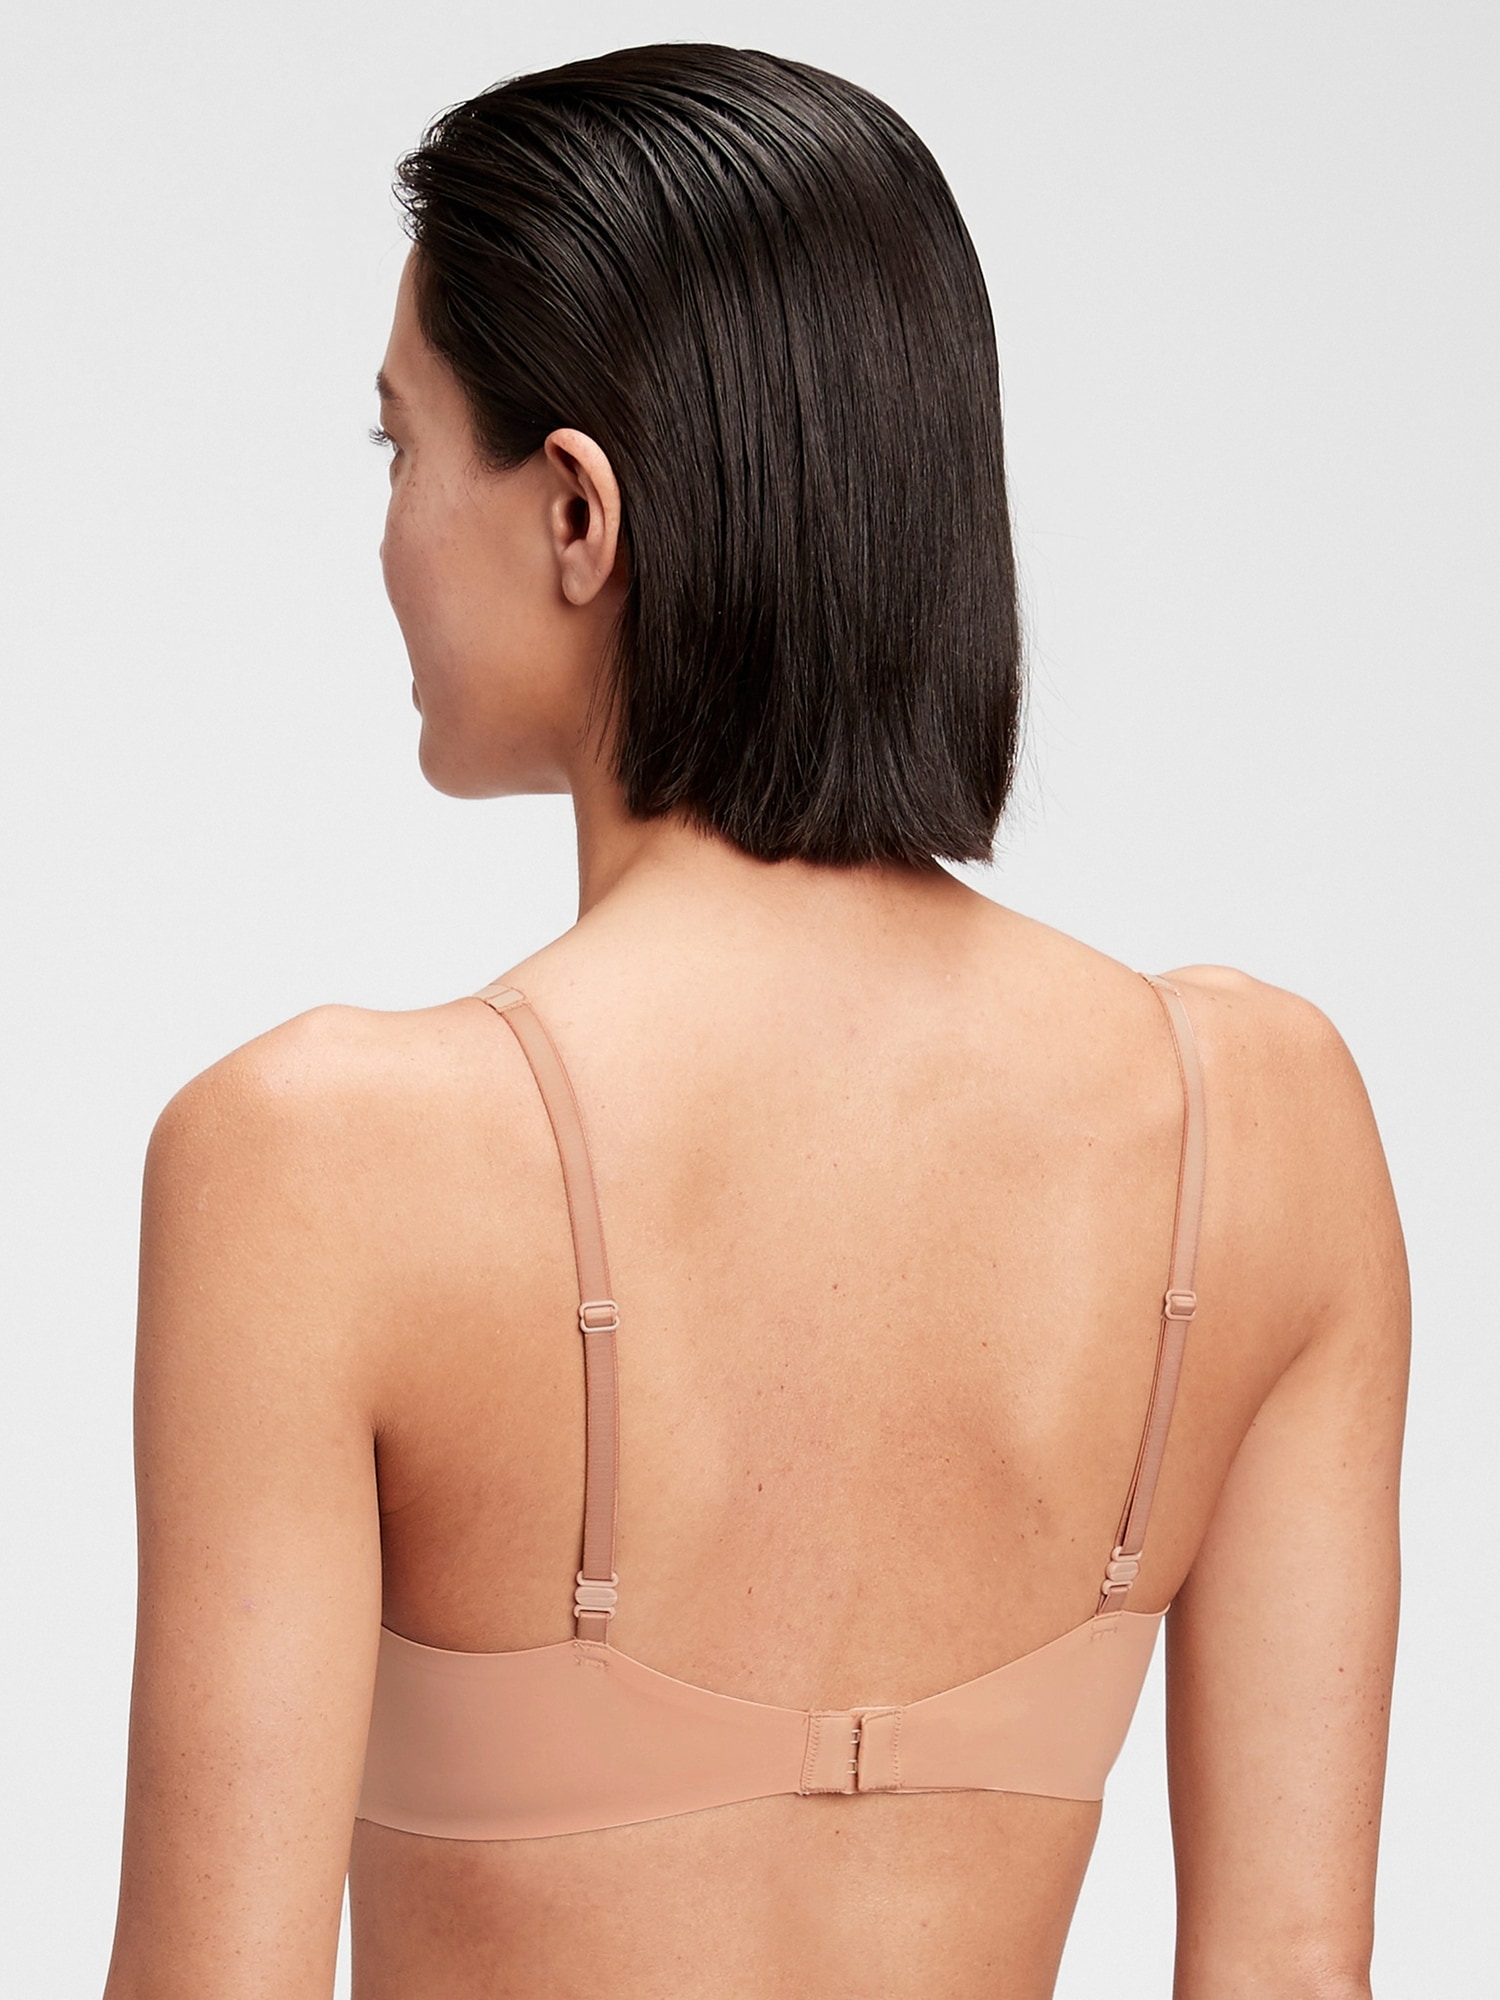 Large Backless Back Sling Bra Seamless, Thin, And Sexy For Women